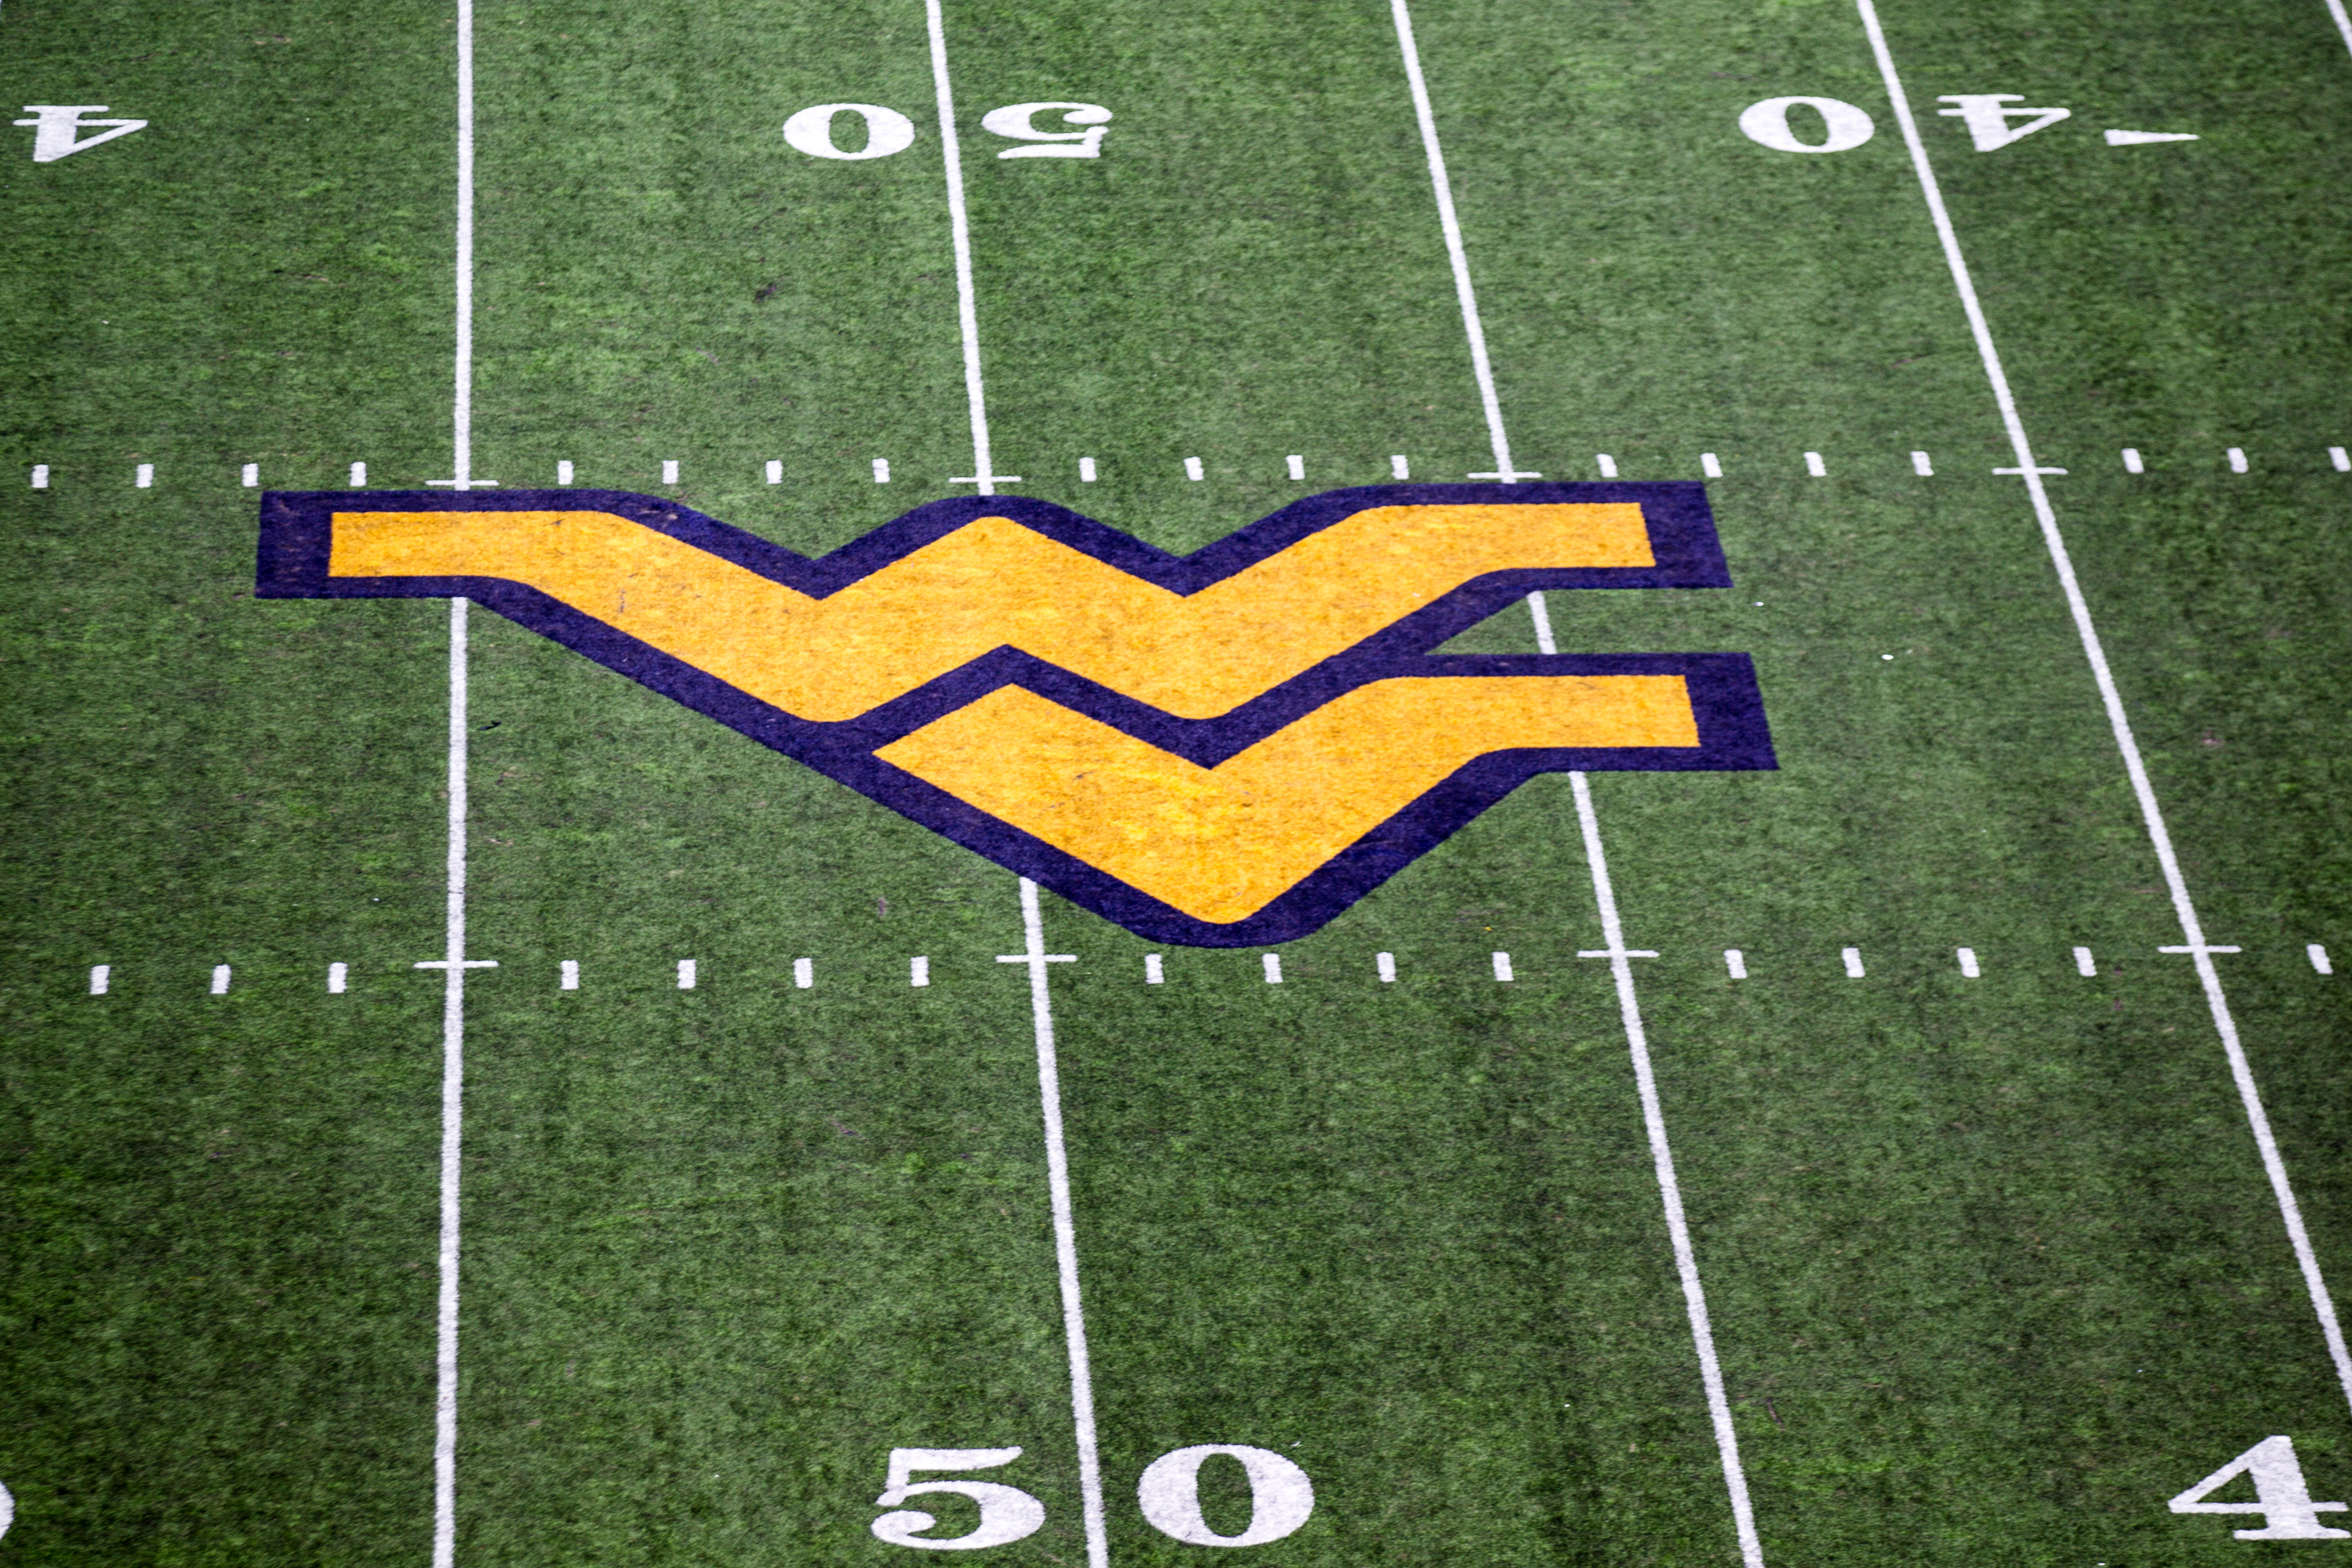 NCAA FOOTBALL: SEP 10 Youngstown State at West Virginia